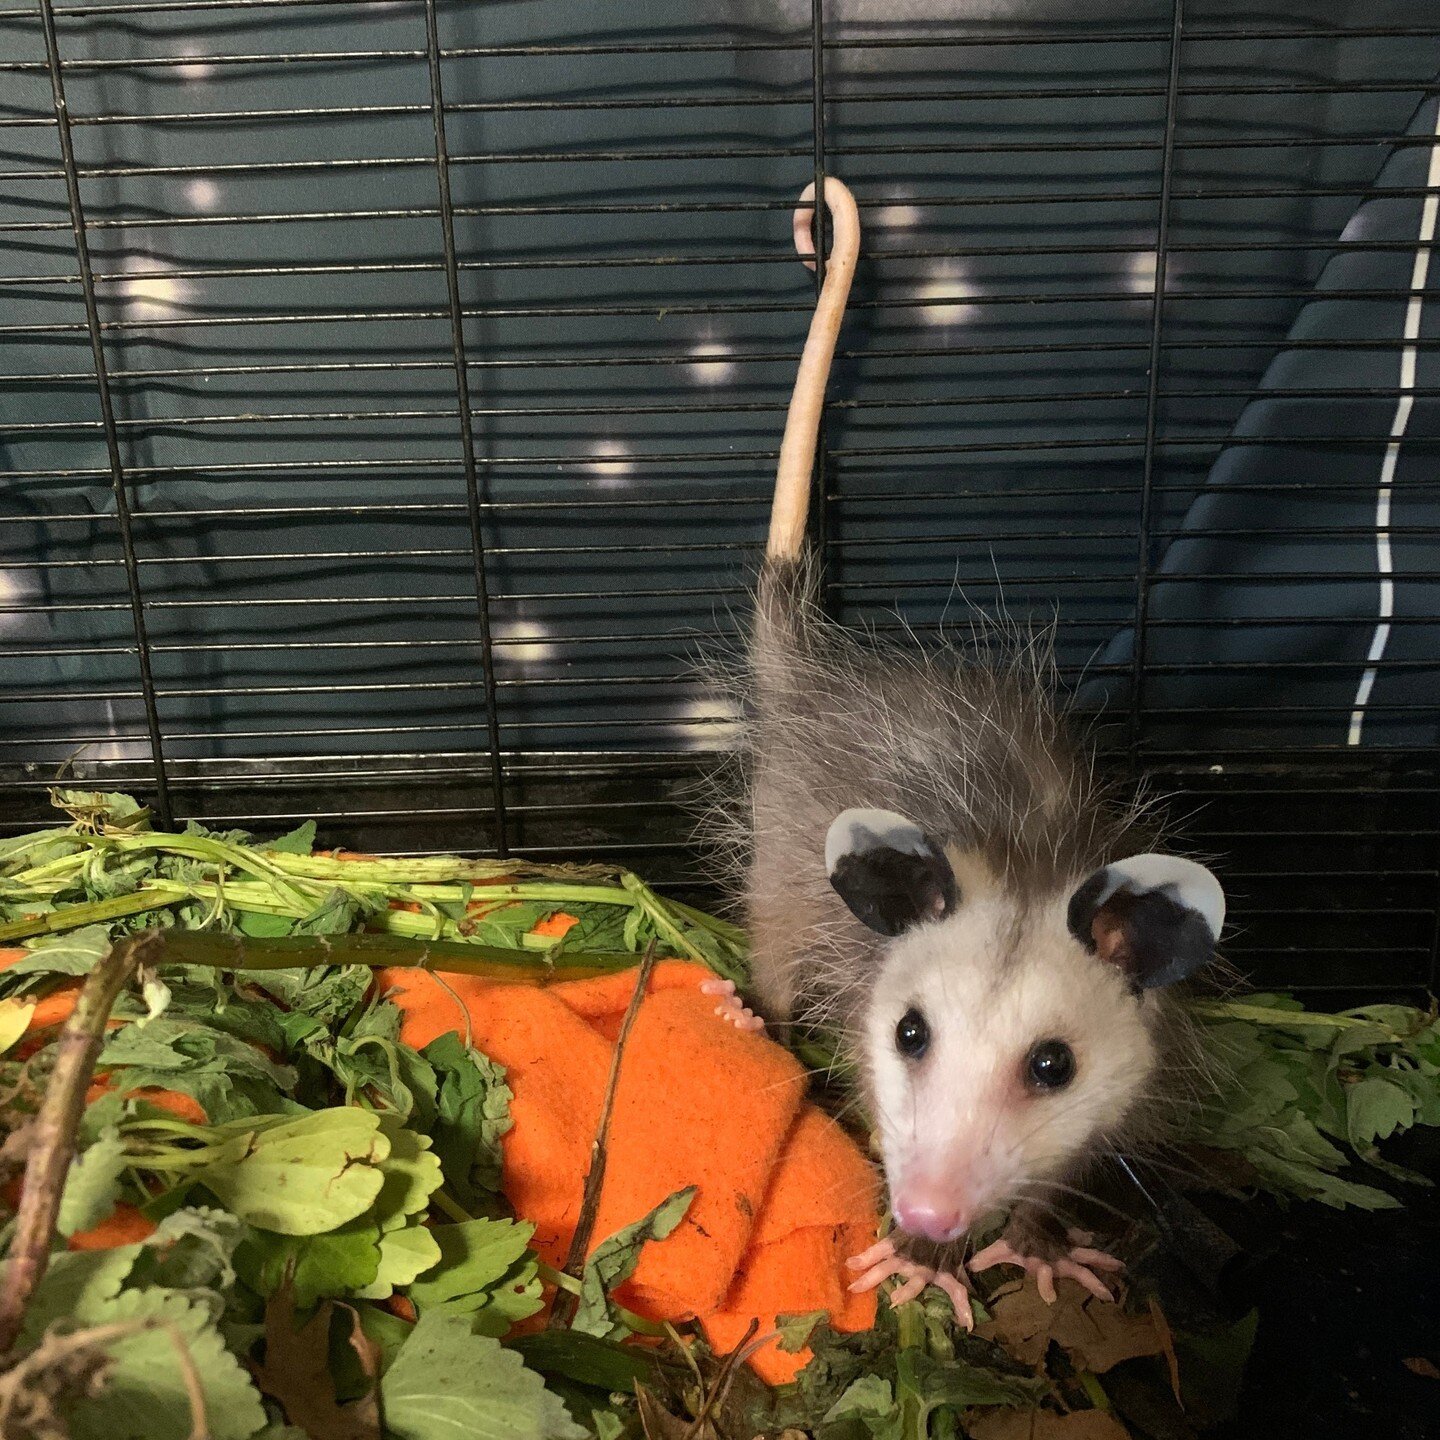 &quot;Hello, I am an opossum. I have opposable thumbs and a prehensile tail and an uncanny ability to steal hearts.&quot; ⁠
⁠
#tennesseewildlife #wildliferehab #wildliferescue #opossumoparty